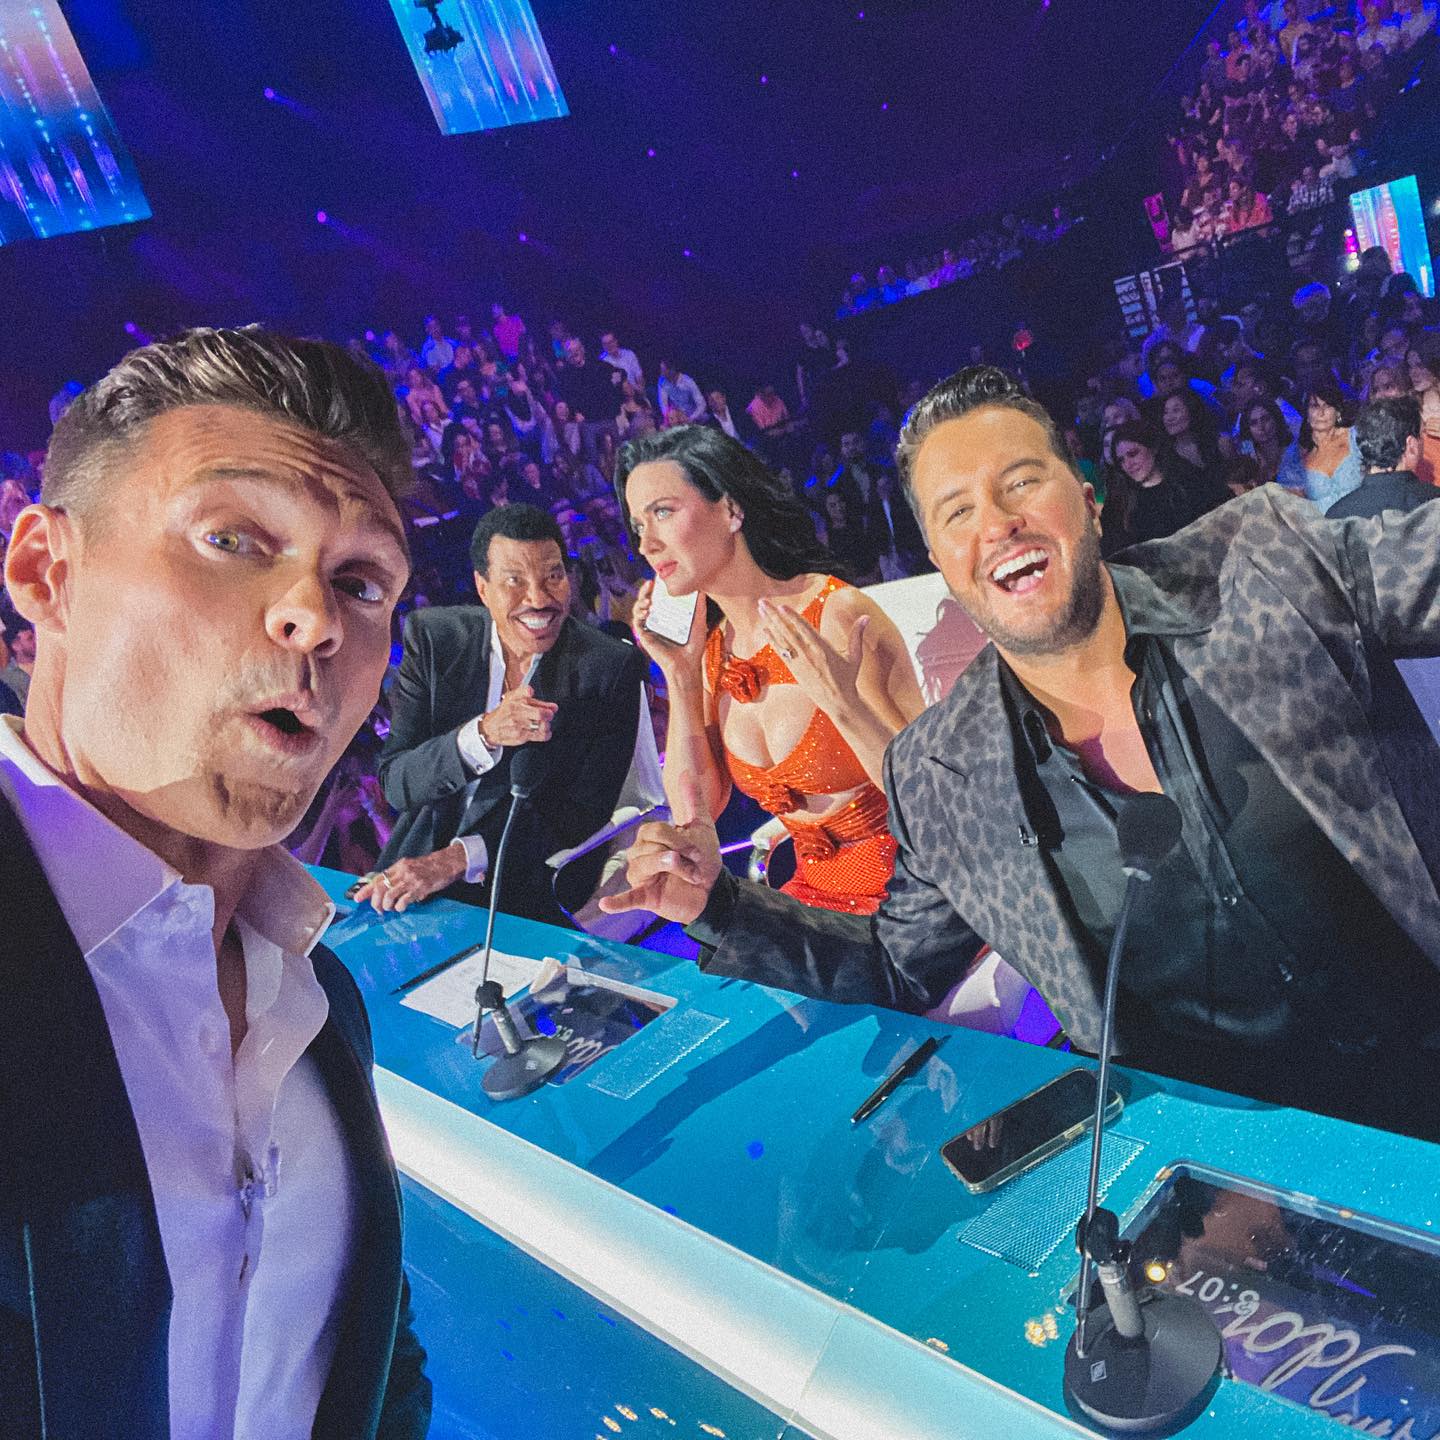 Seacrest with his cohosts from the American Idol. He is taking selfie with all of them.